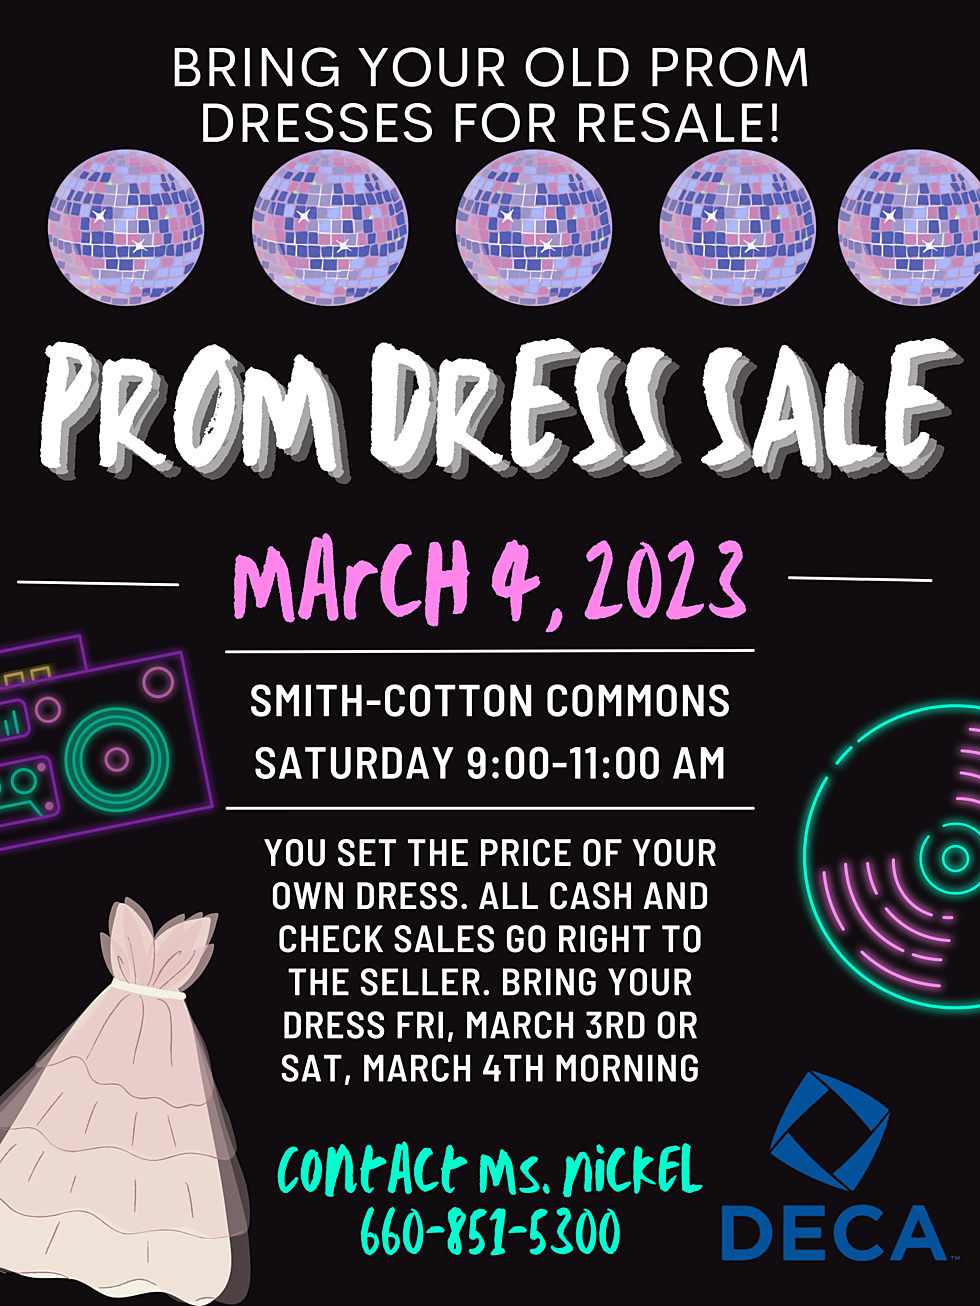 S-C DECA To Host Used Prom Dress Sale